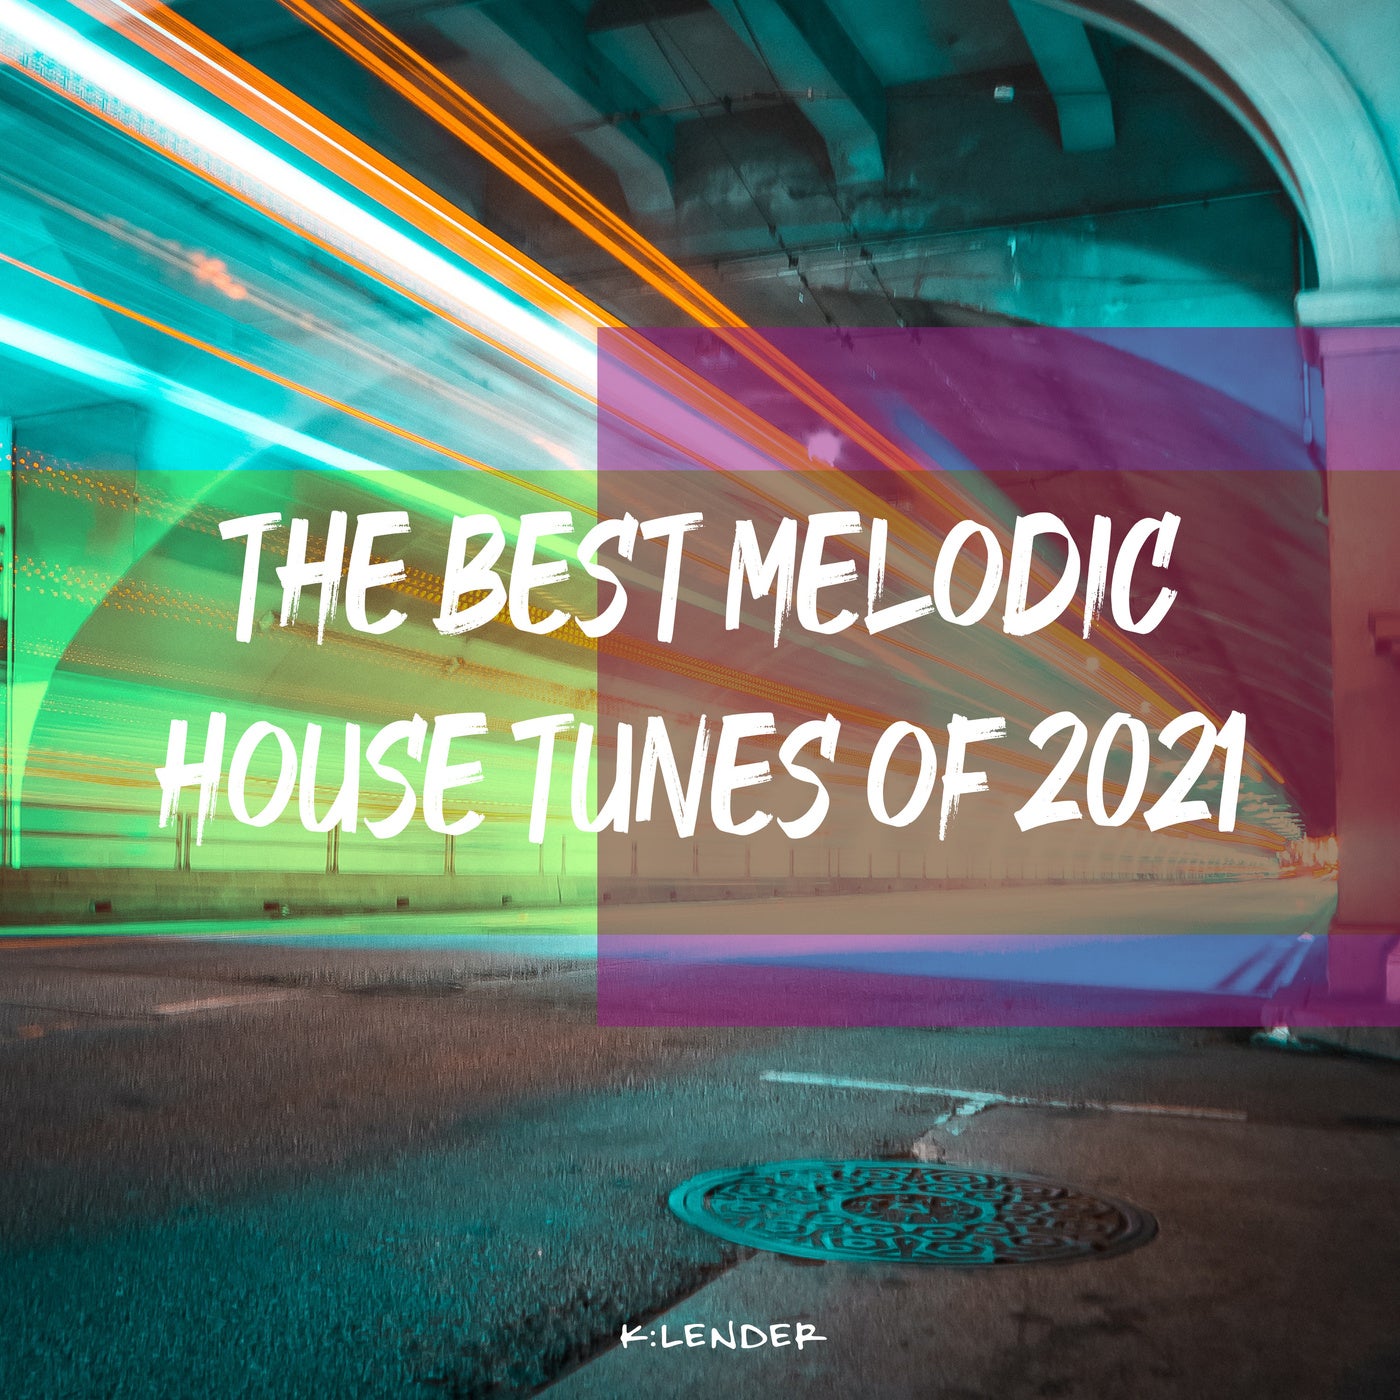 The Best Melodic House Tunes of 2021